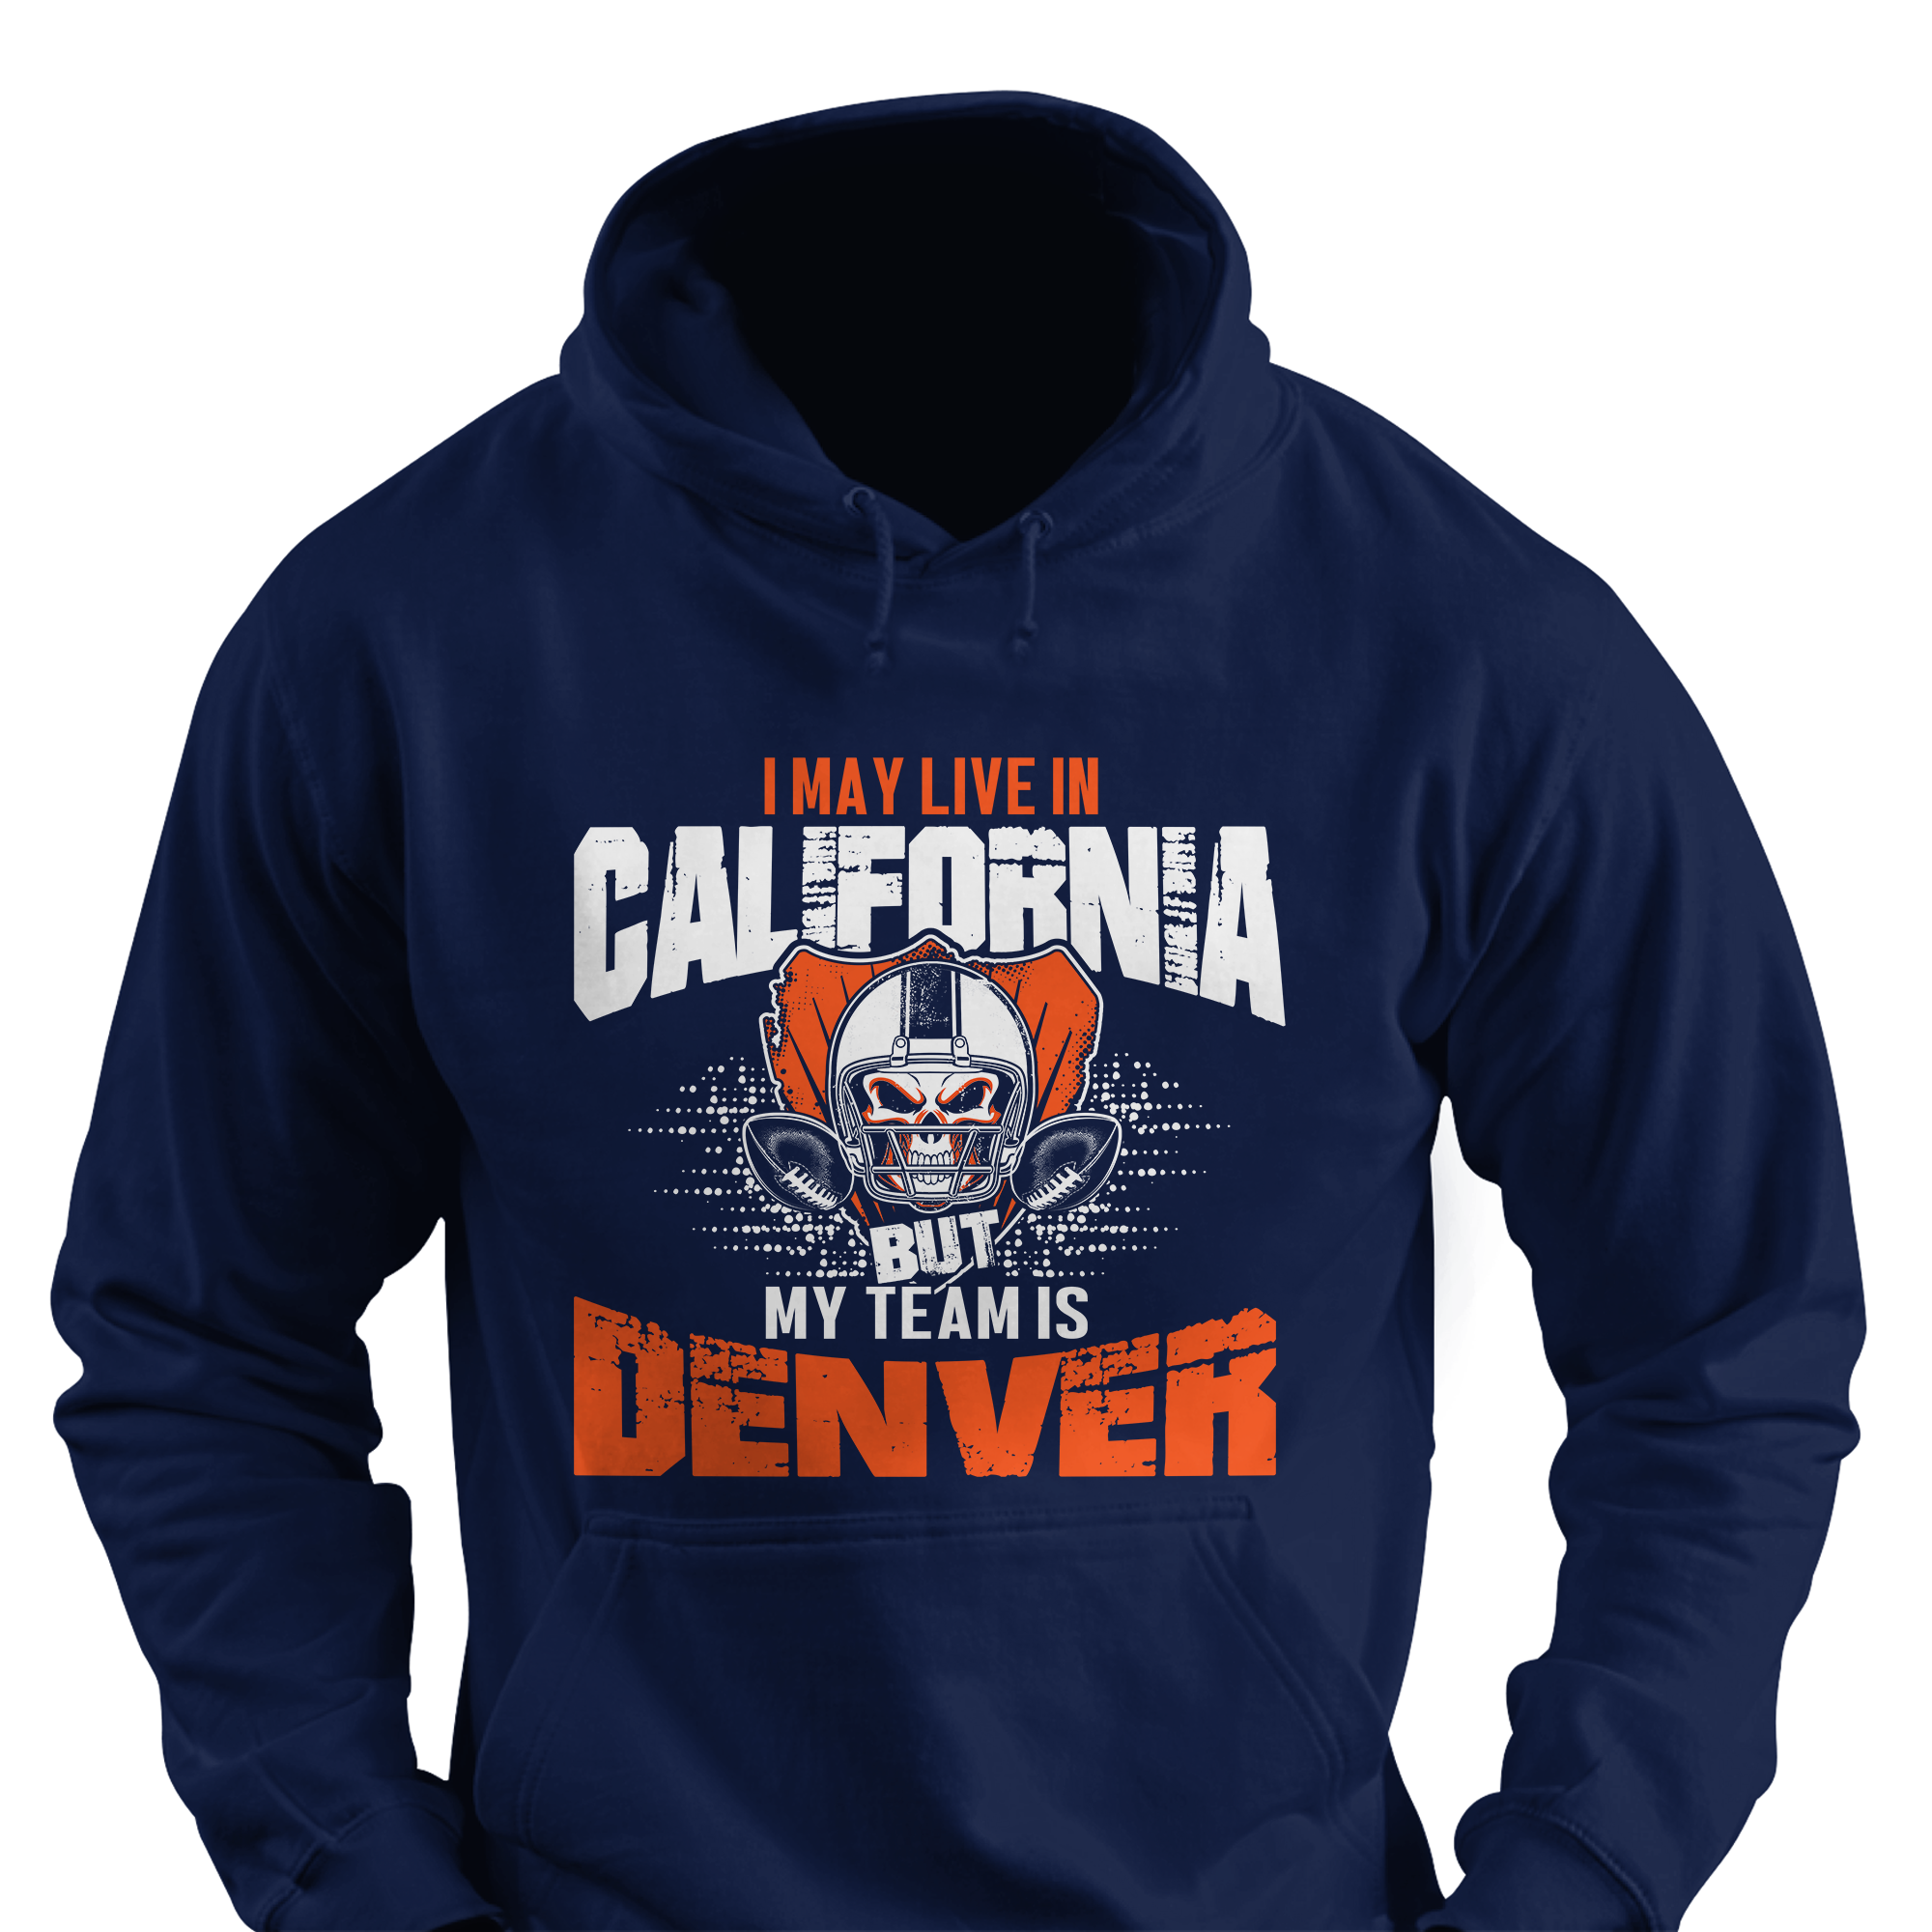 I may be in California but my team's Denver